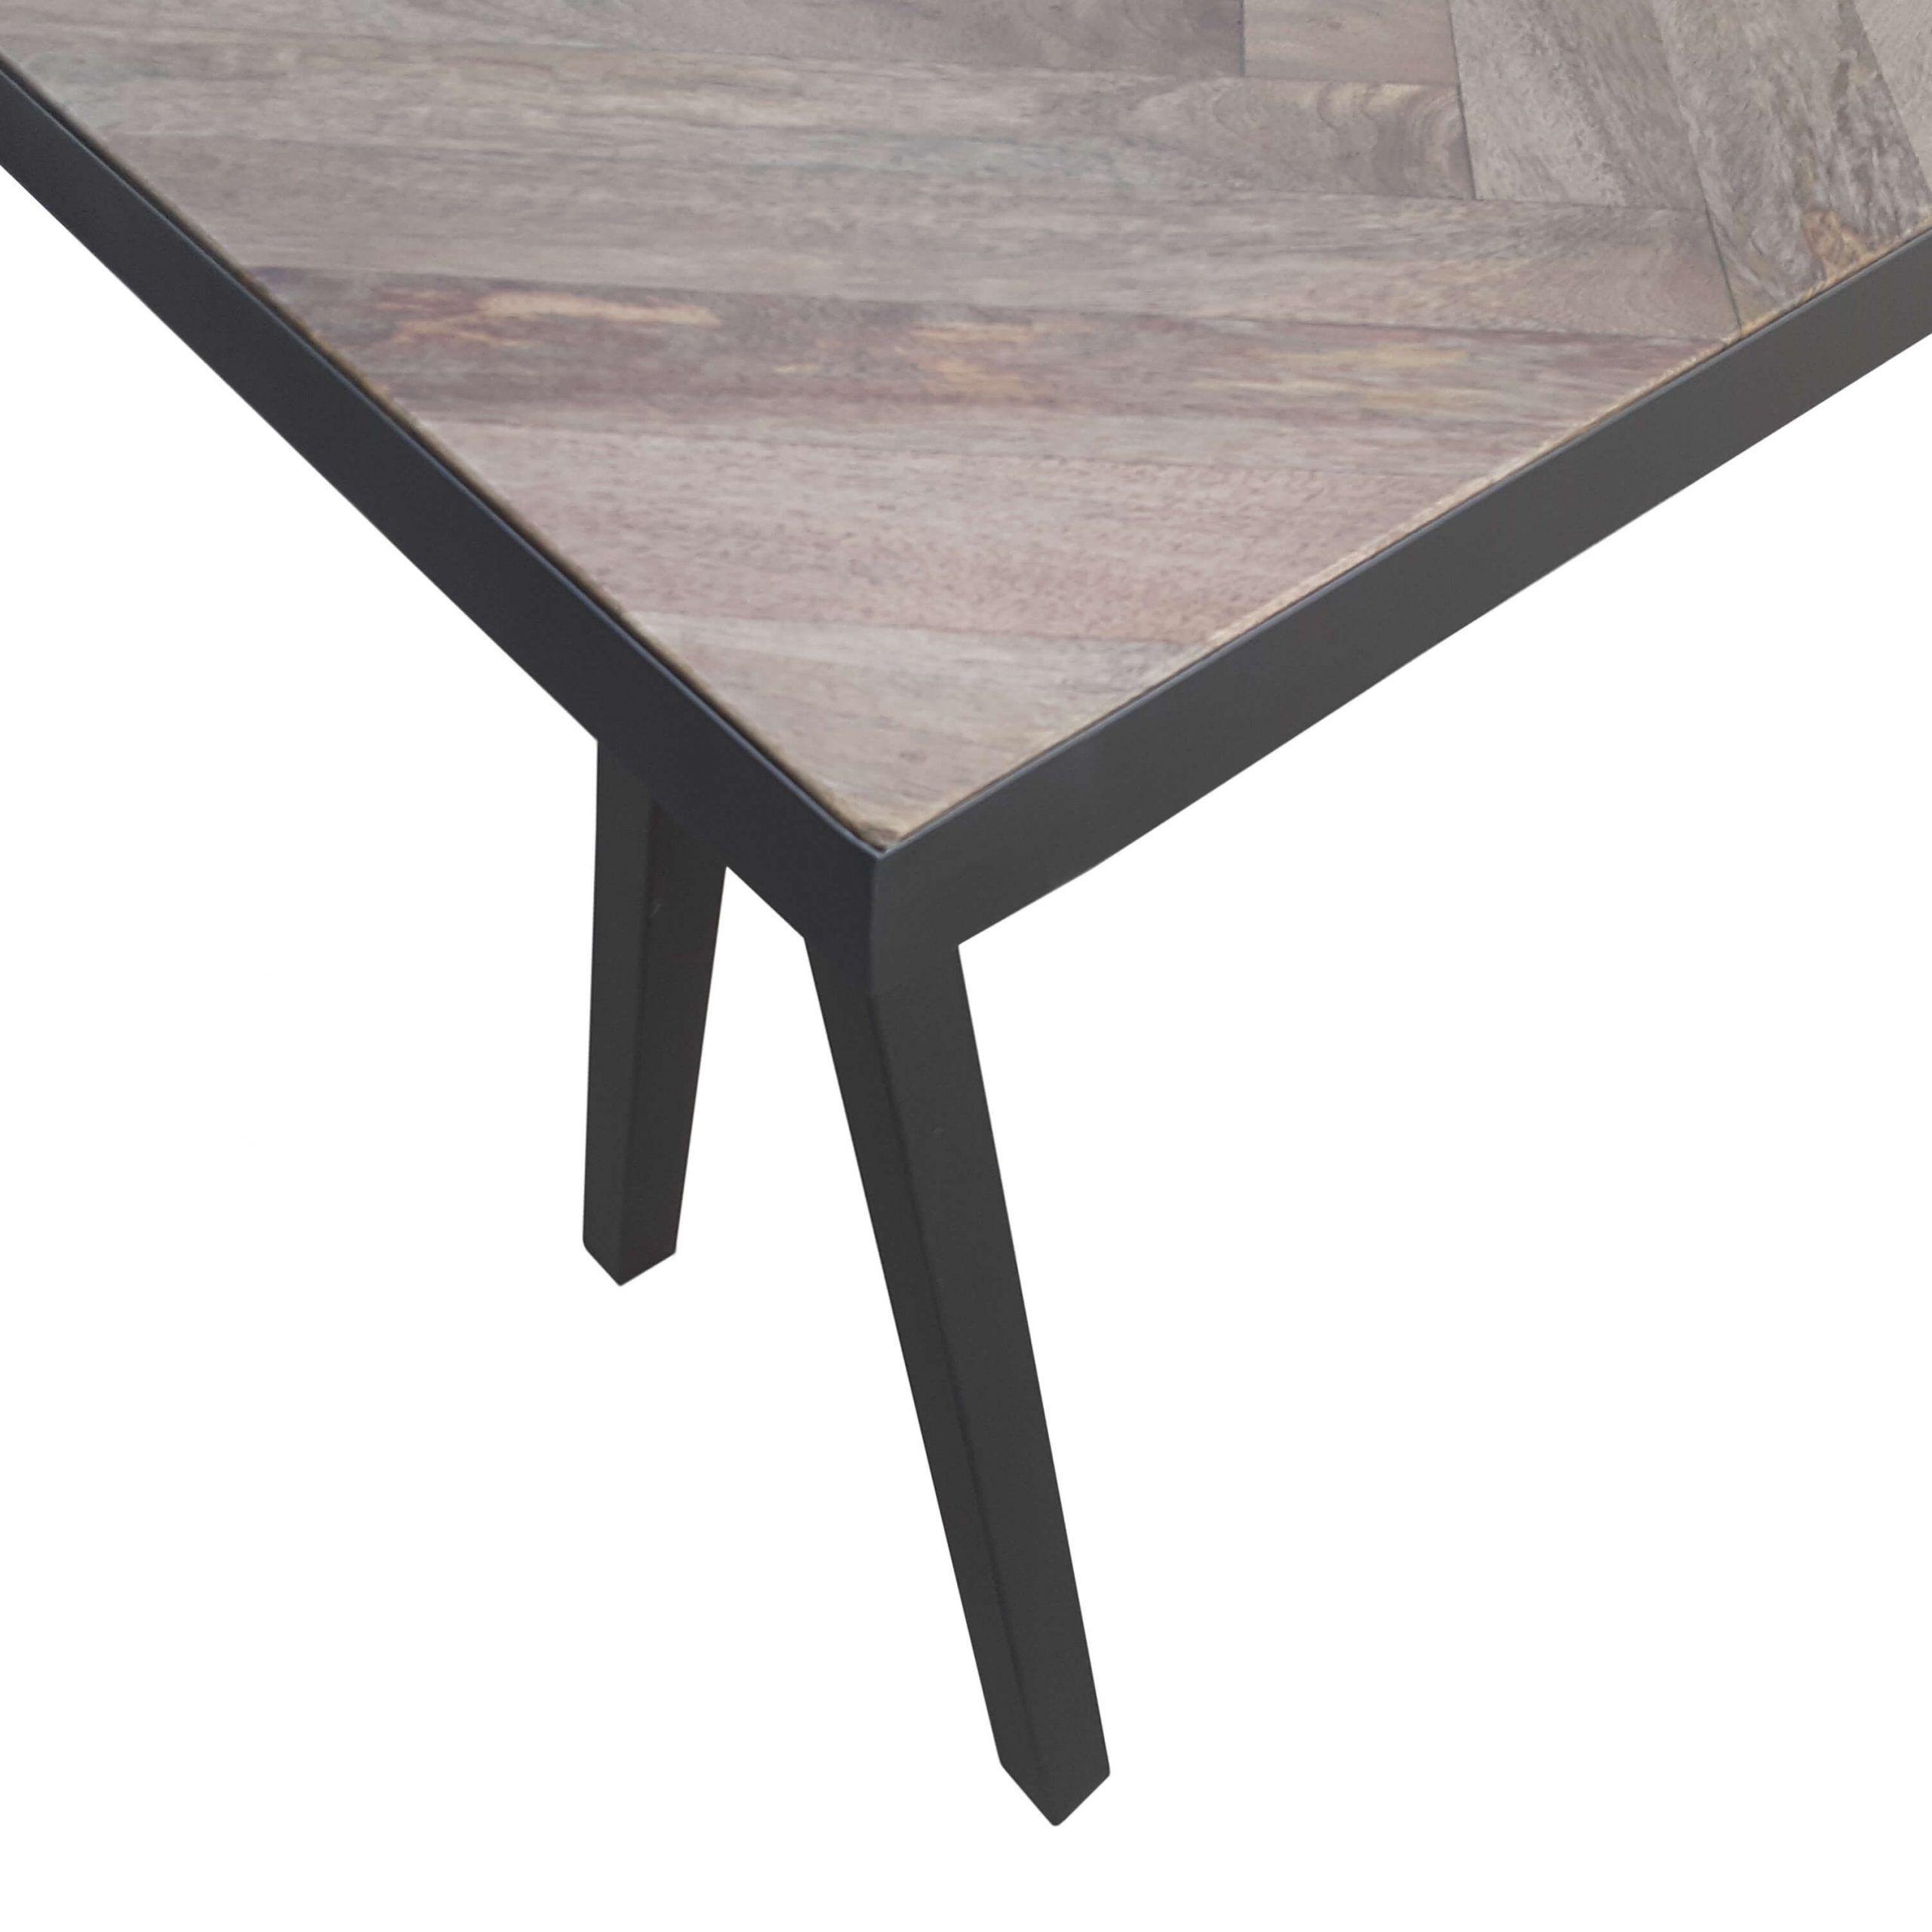 Console Table : Herringbone Console Table Within Metal Legs And Oak Top Round Console Tables (View 4 of 20)